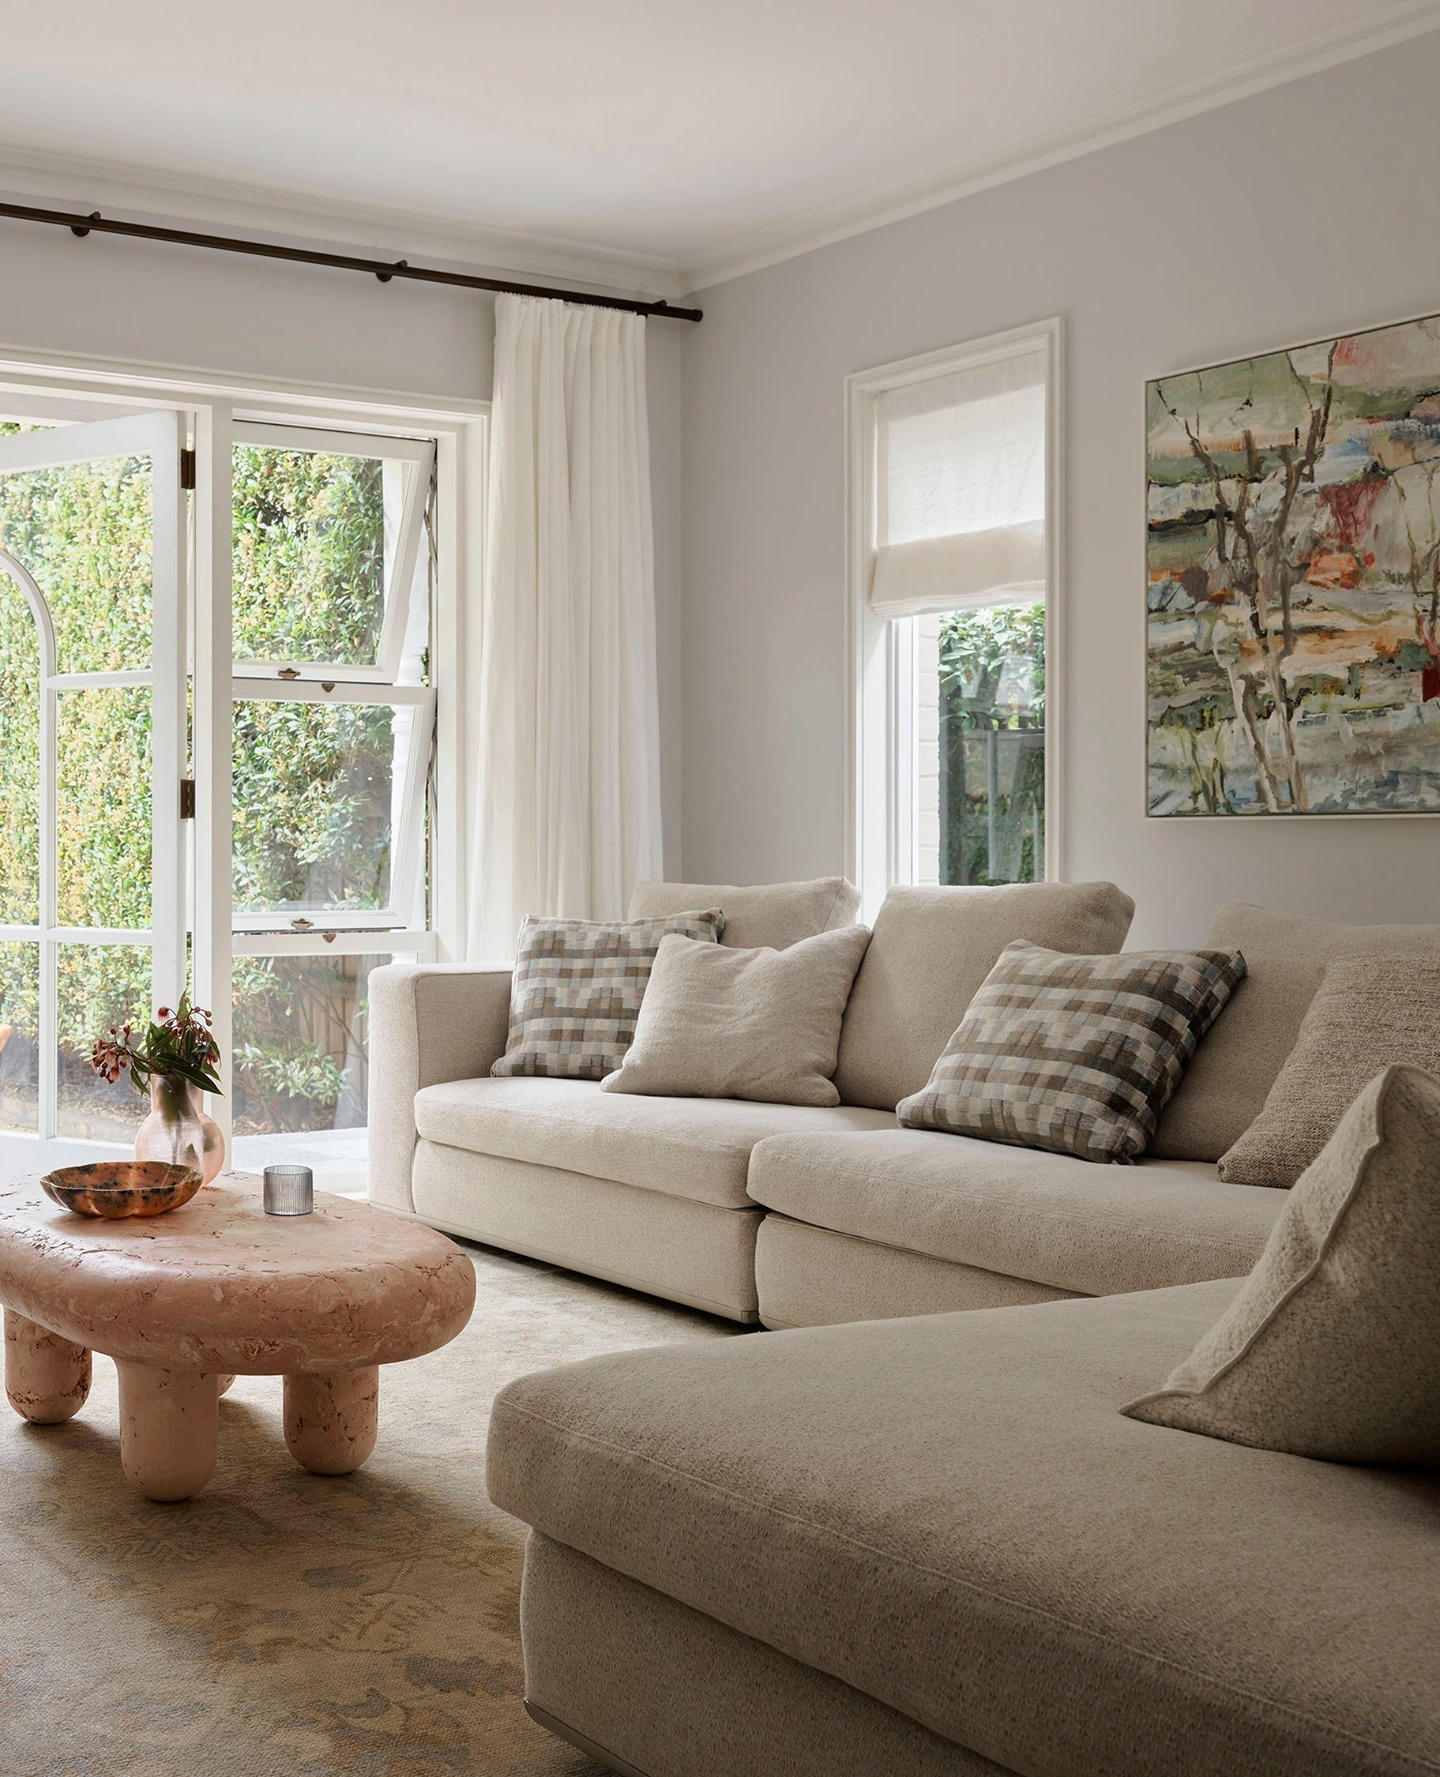 Arent&Pyke - The elegant light filled living room of our #arentpykestdio Darley House project